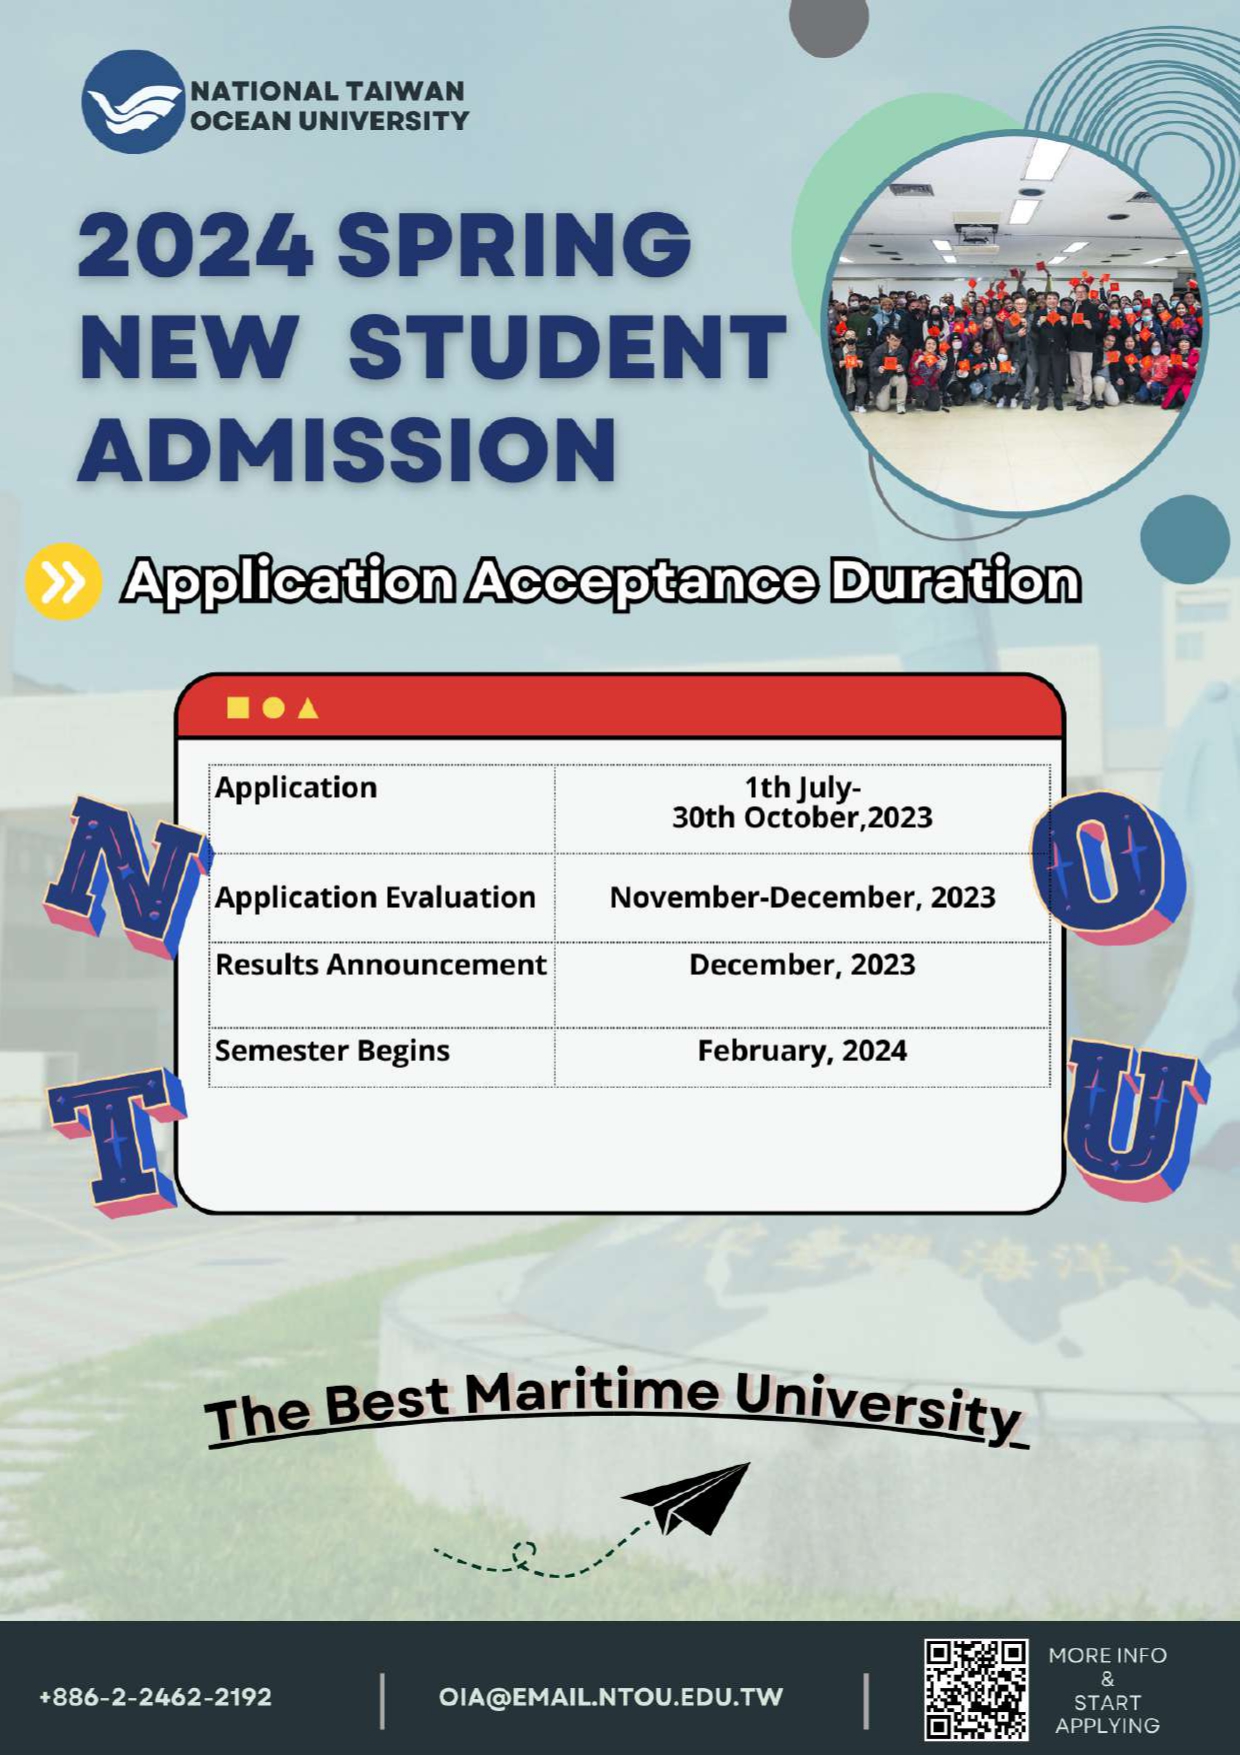 【2023.9.18】National Taiwan Ocean University — Spring 2024 Semester Foreign Student Applications Now Open!